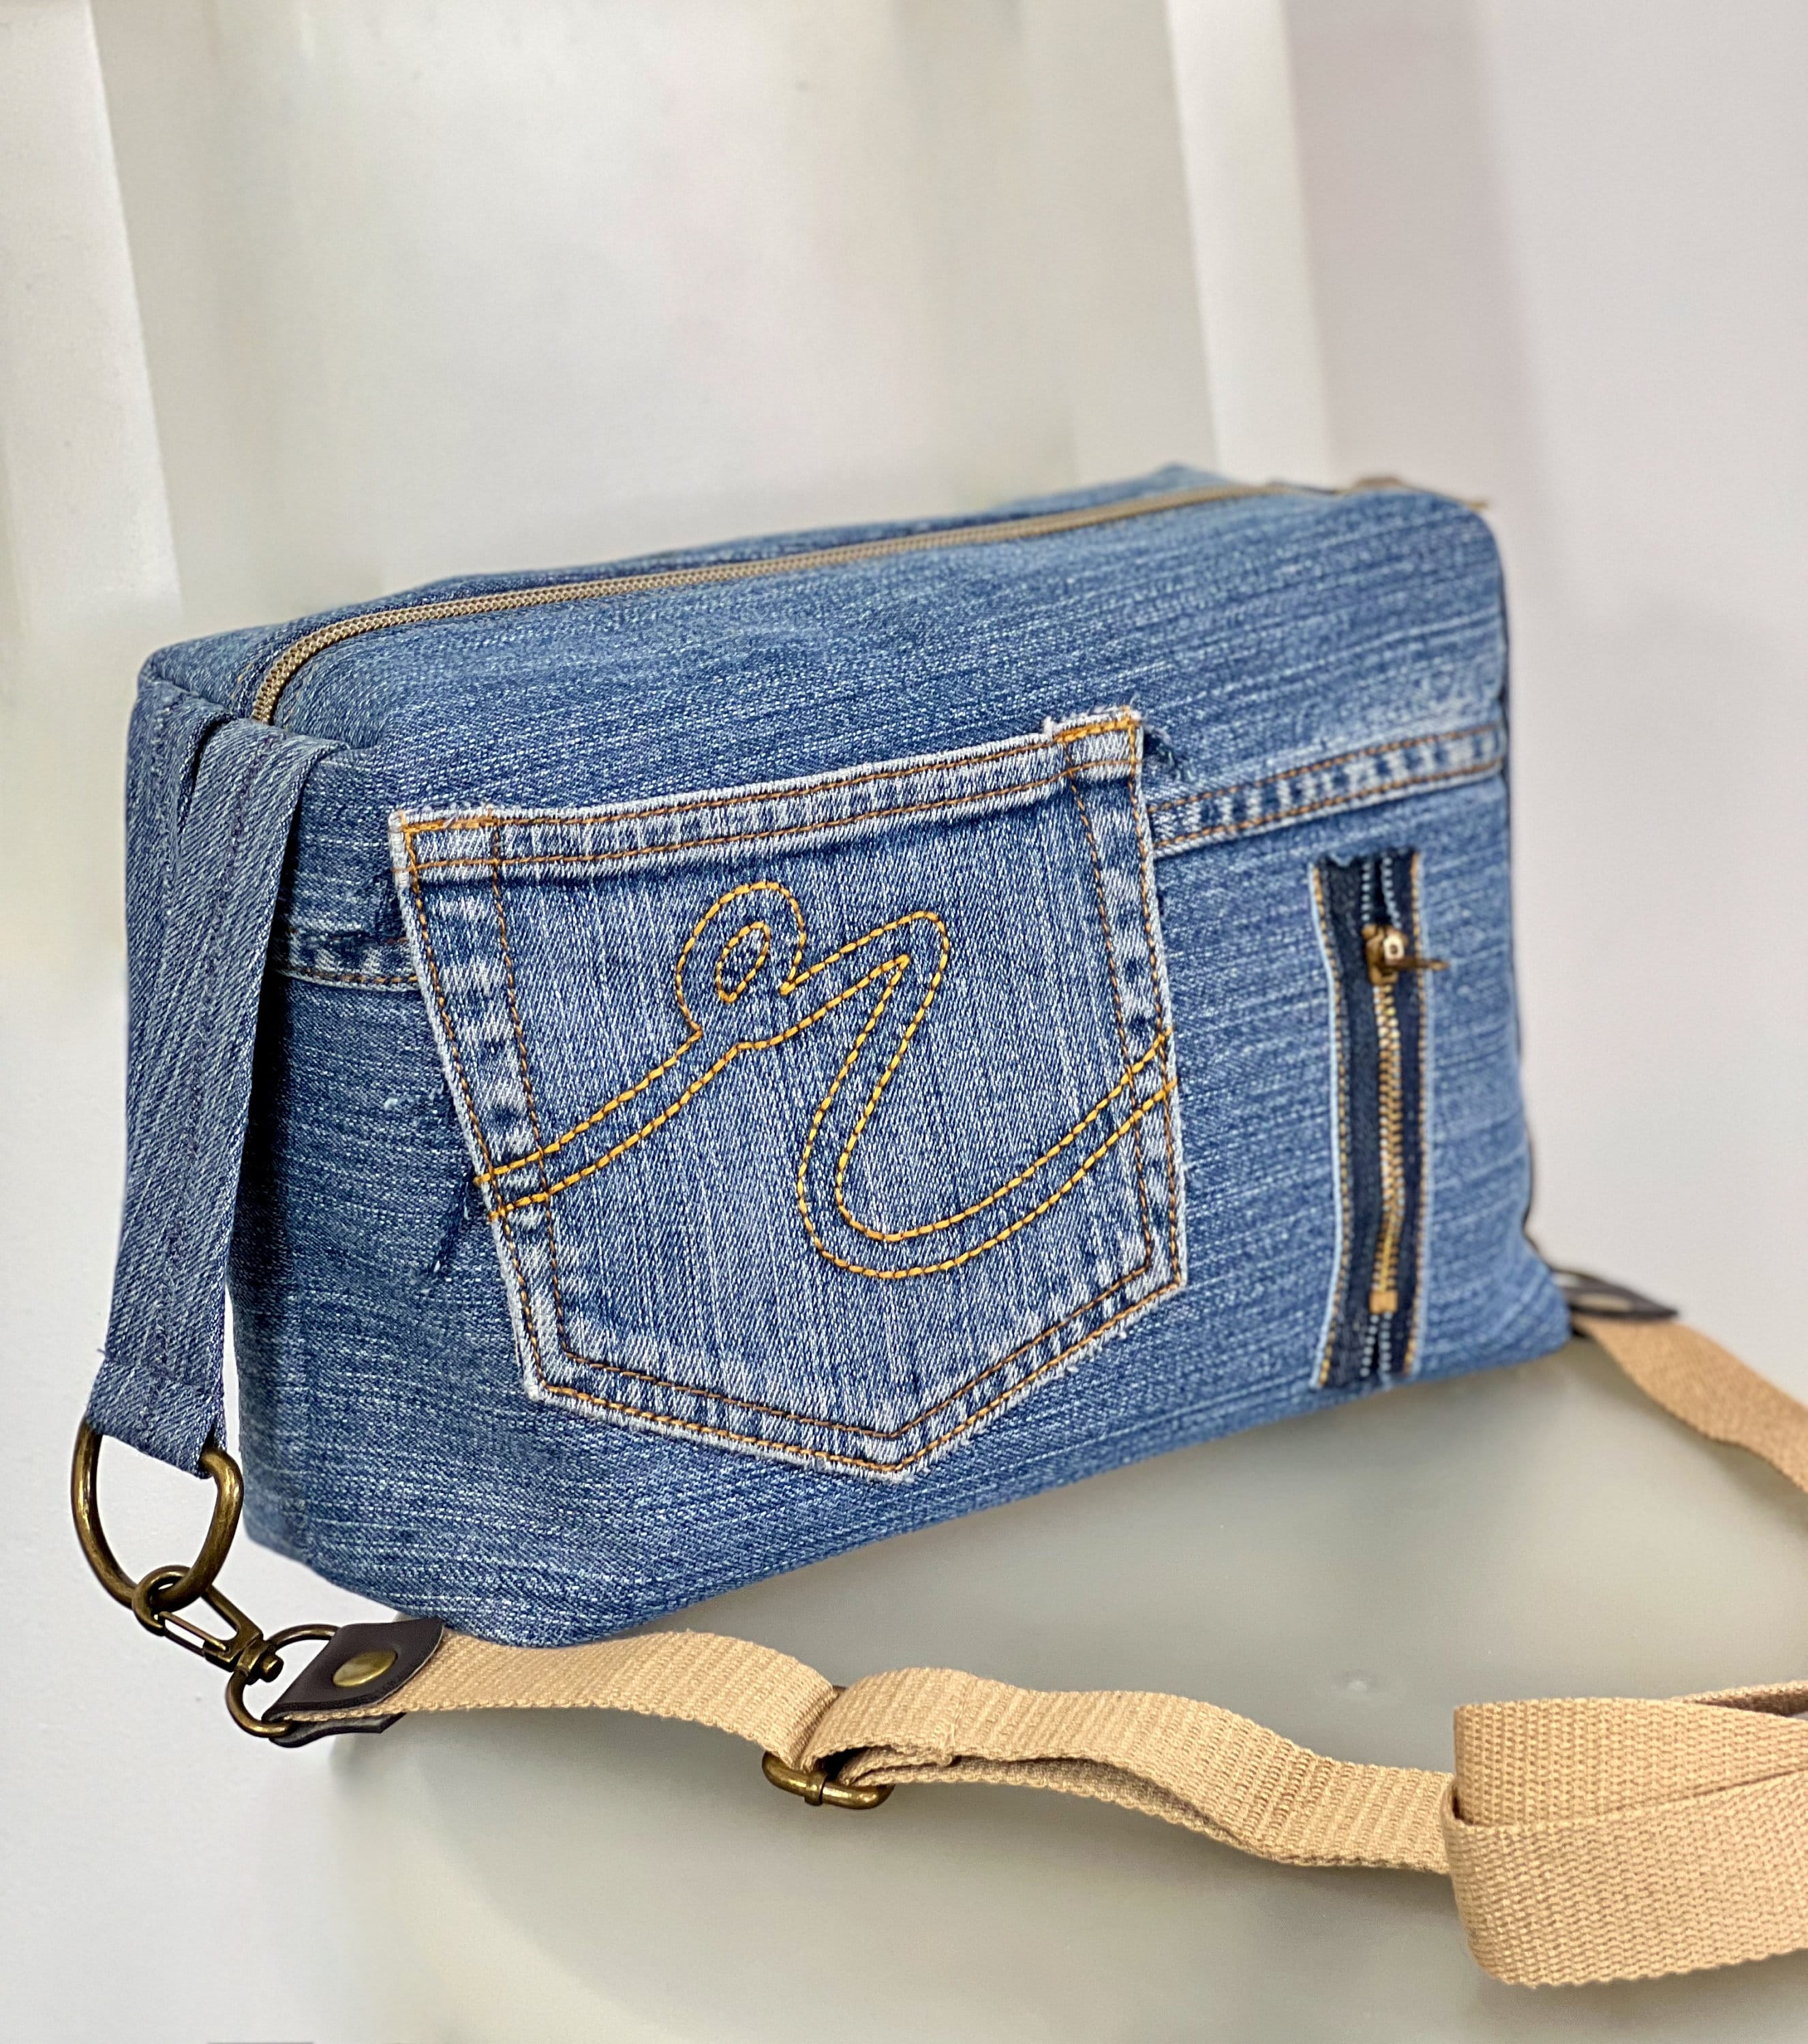 Cross Body Bag, Up-cycled Denim Pouch, Unisex Jeans Purse, Repurposed ...